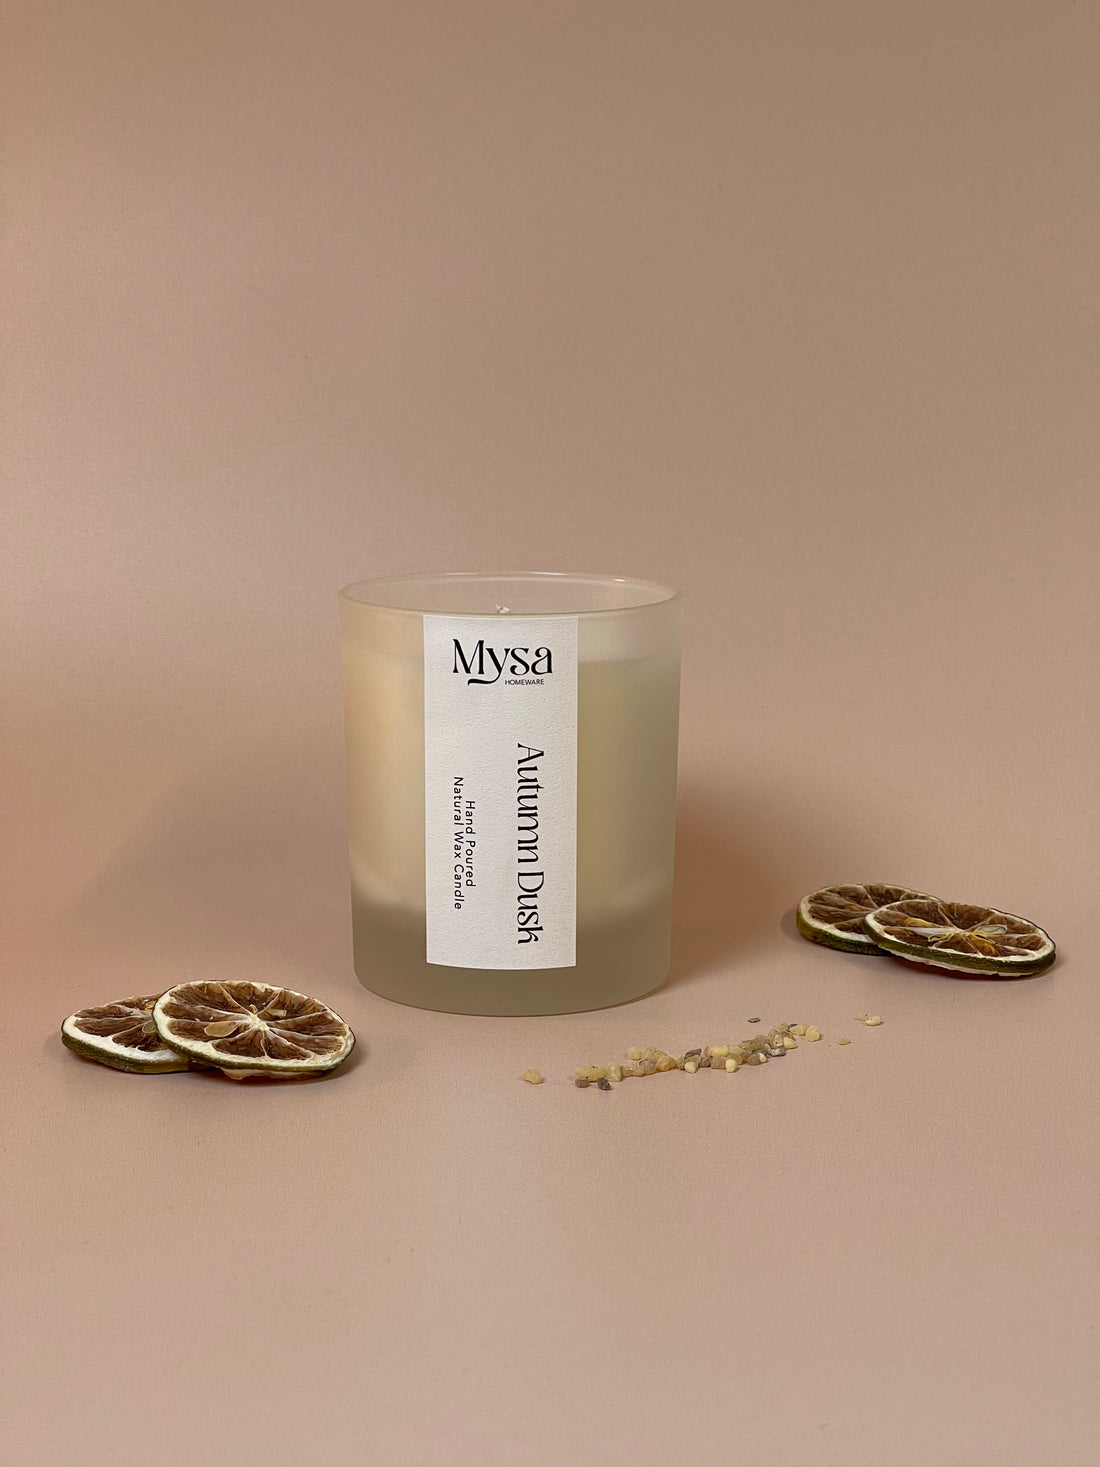 Autumn Dusk luxury scented candle in gift box, with natural wax and frankincense &amp; bergamot fragrance.